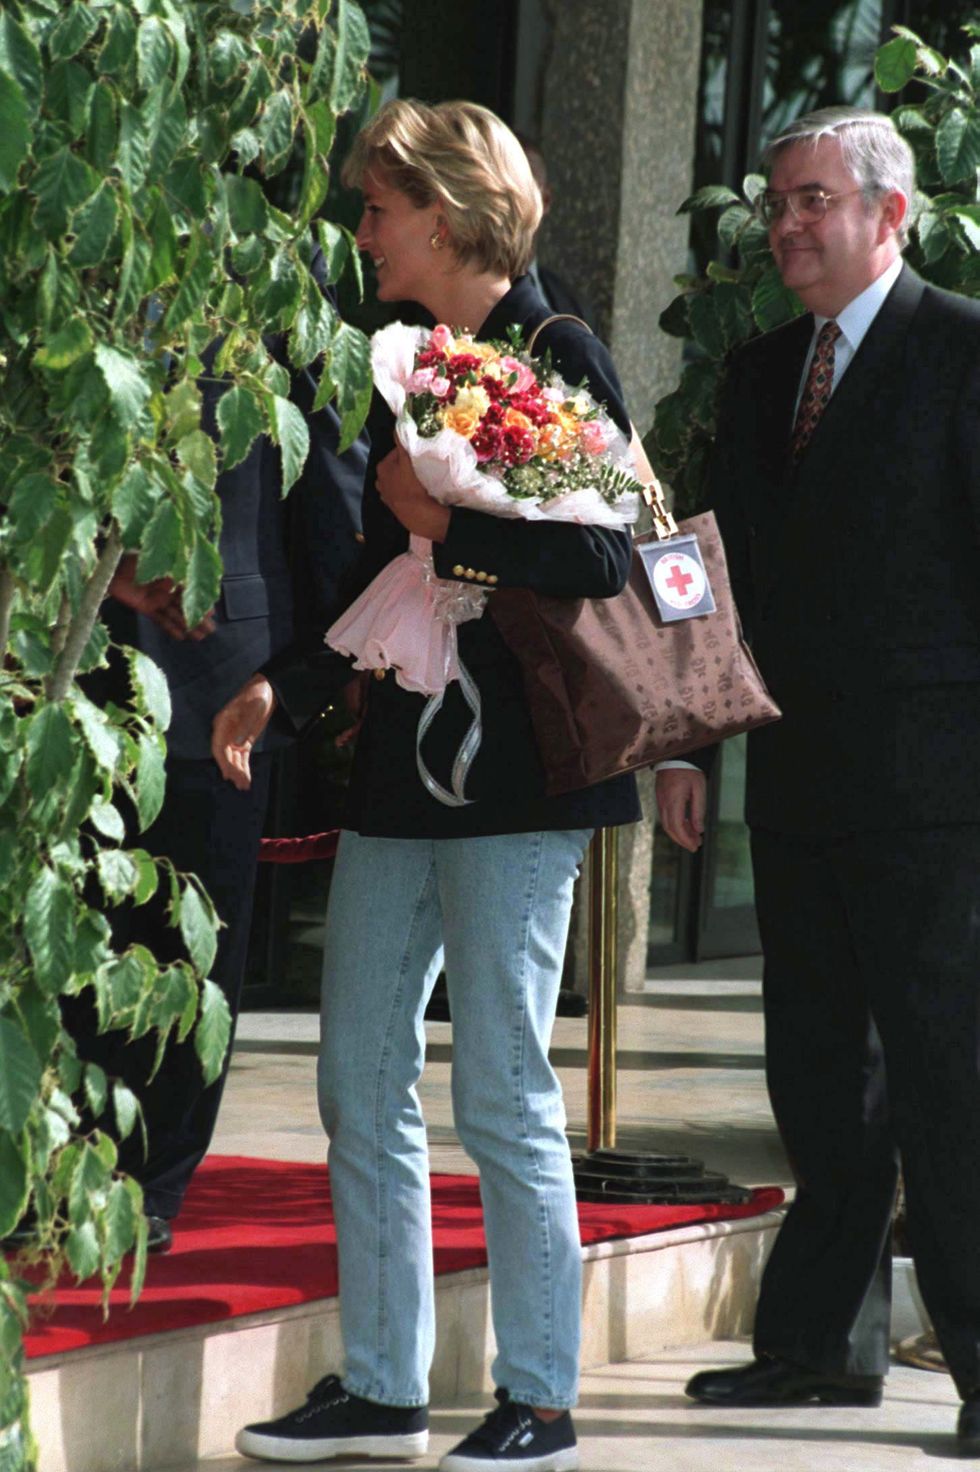 https://hips.hearstapps.com/hmg-prod/images/diana-princess-of-wales-arriving-at-luanda-airport-in-news-photo-1696847611.jpg?resize=980:*